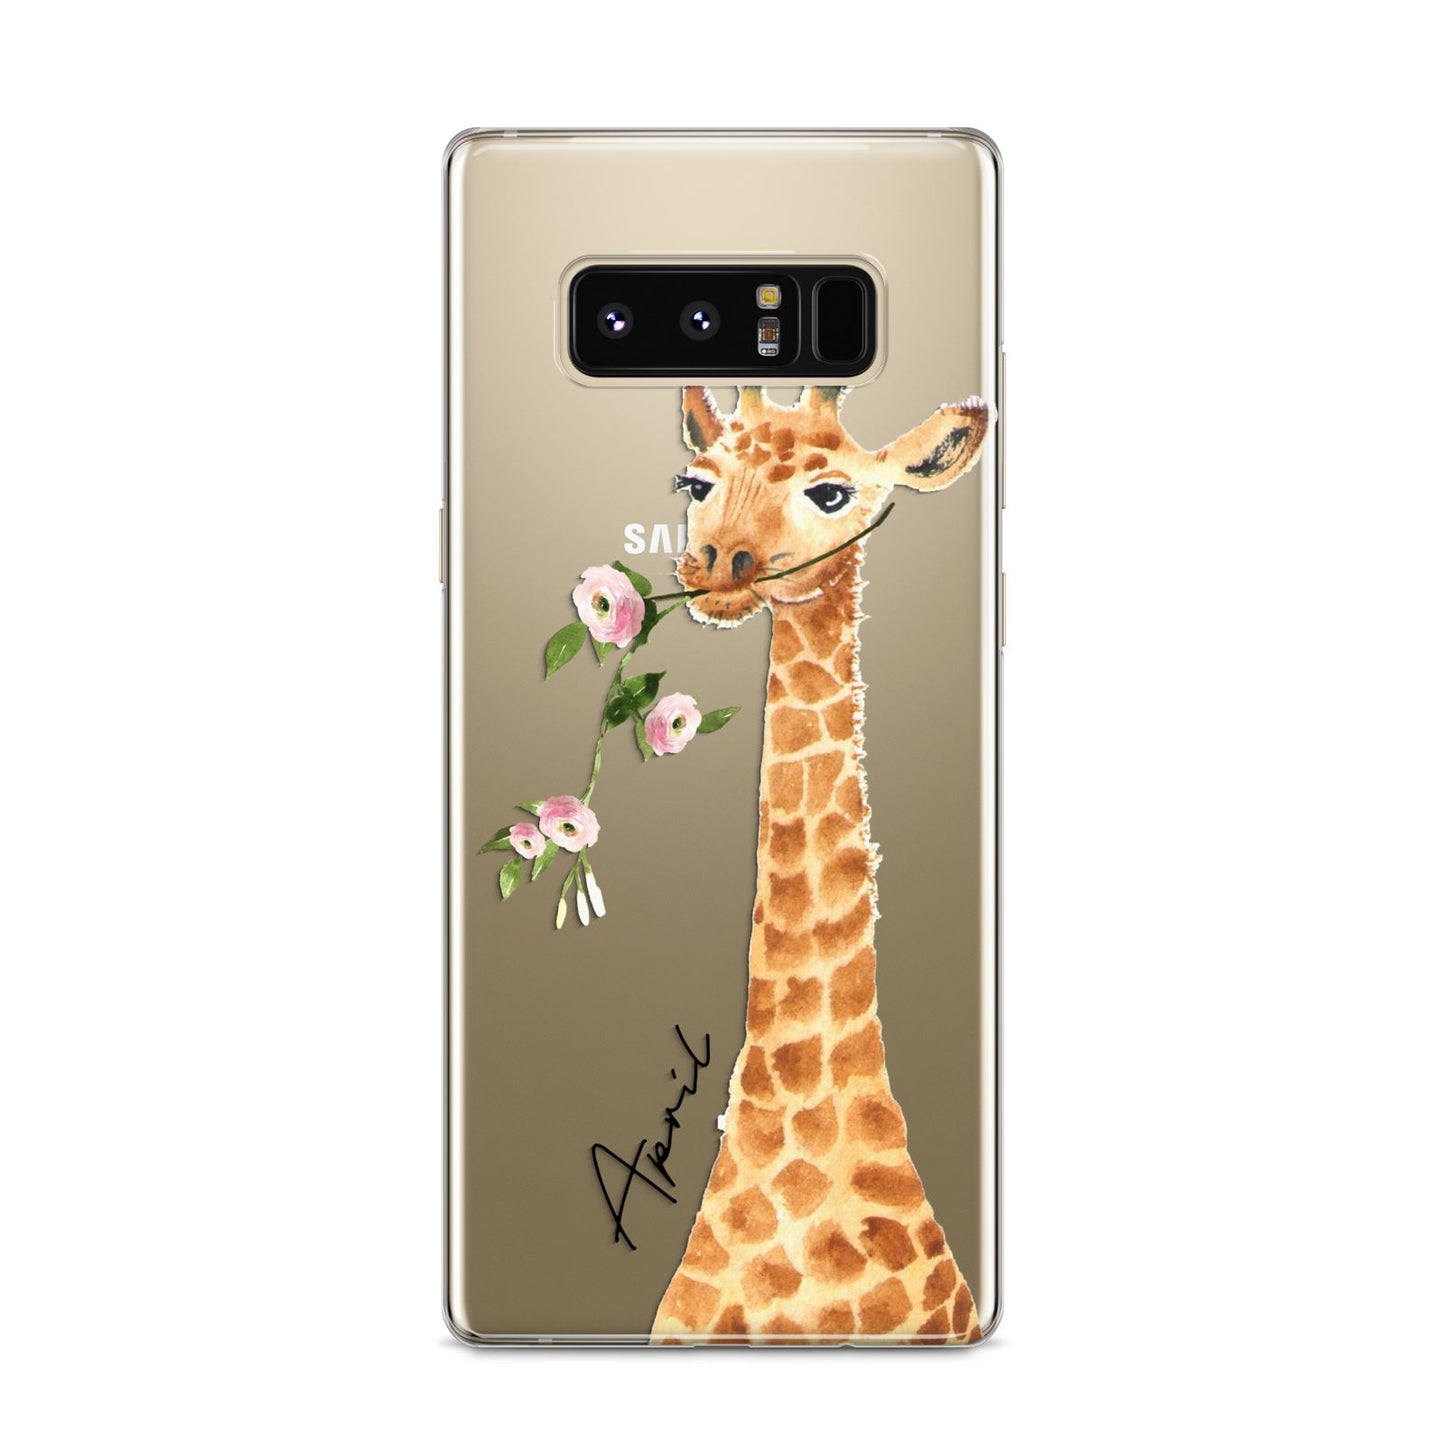 Personalised Giraffe with Name Samsung Galaxy S8 Case